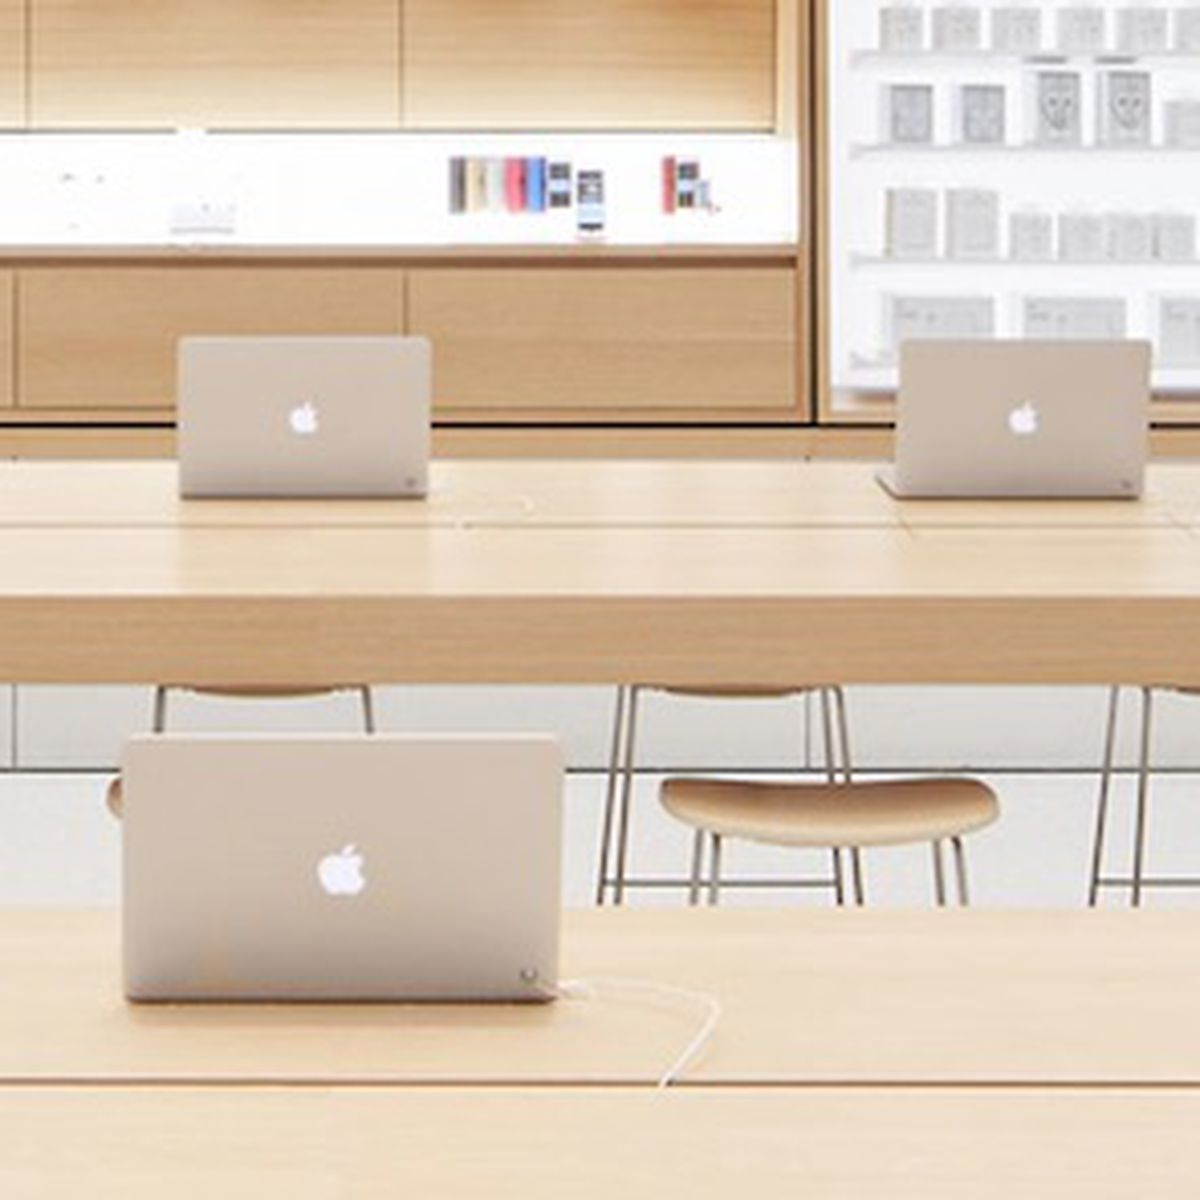 APPLE COMPUTER RETAIL STORE Editorial Photo - Image of computers